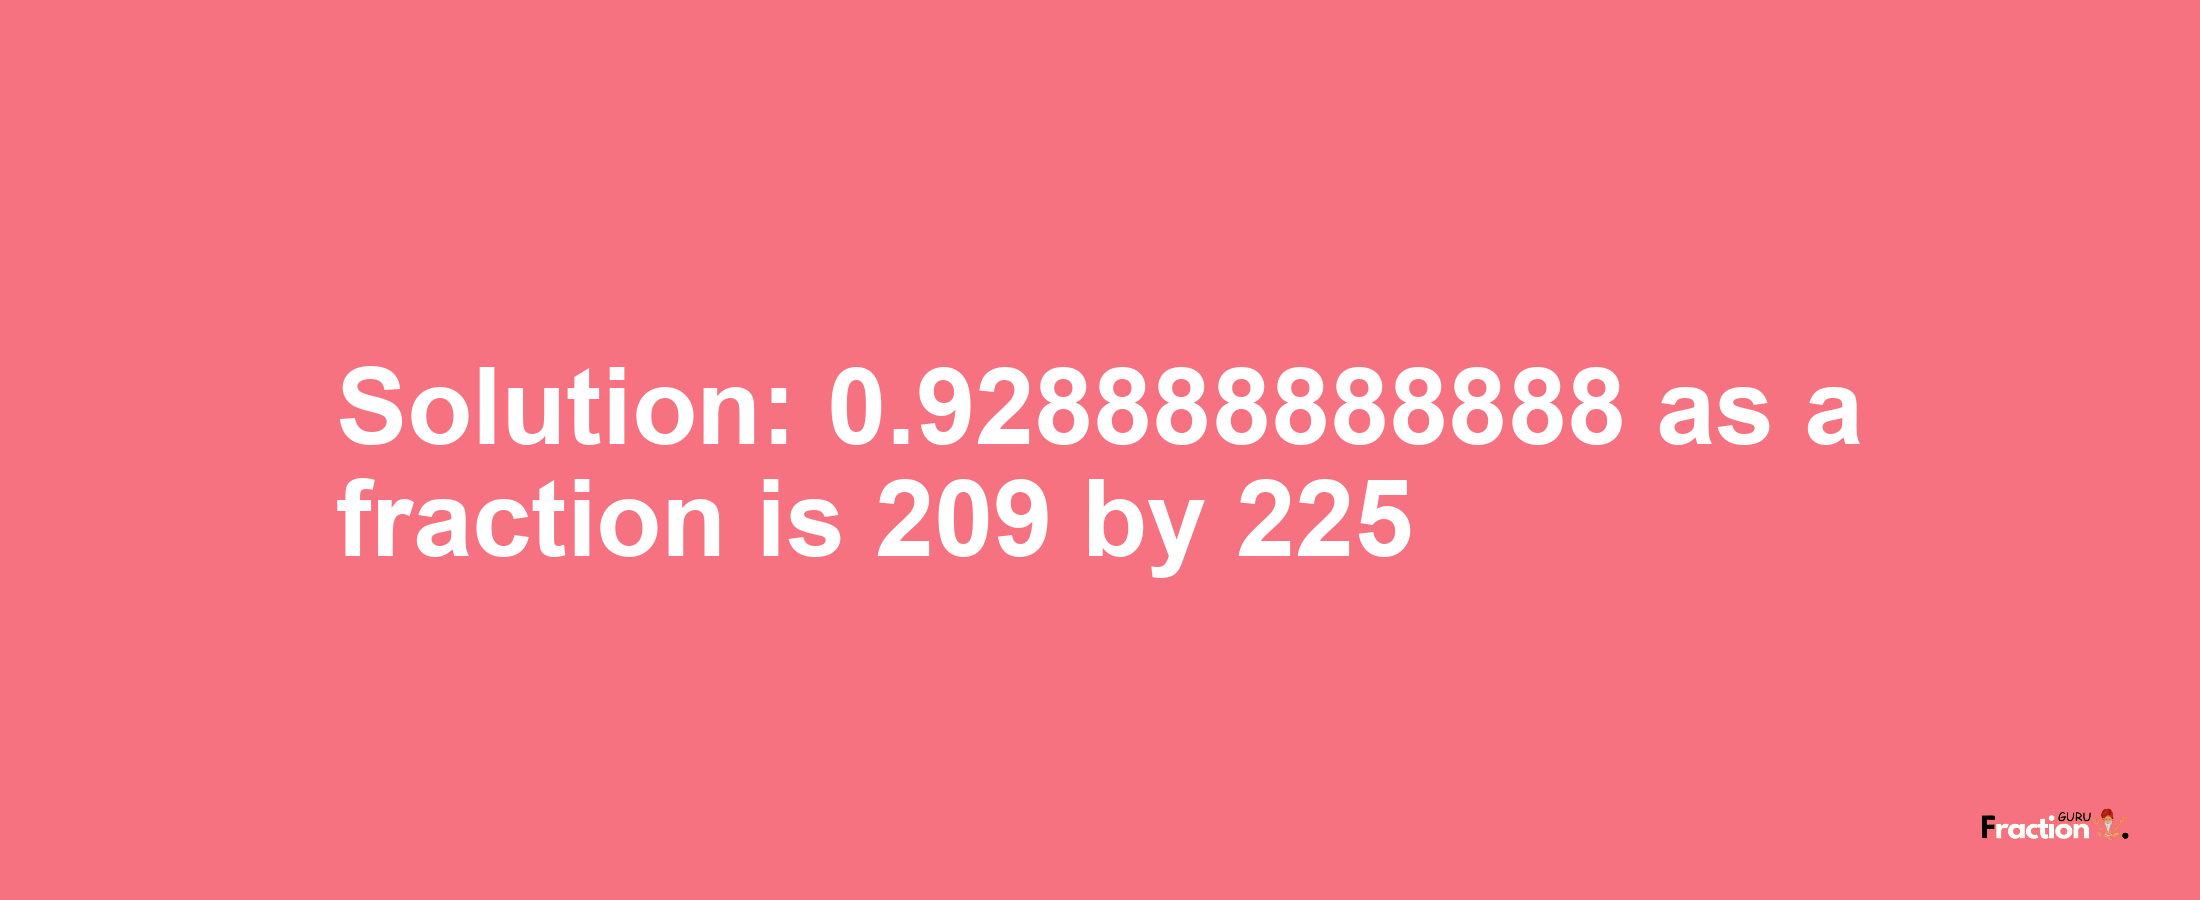 Solution:0.928888888888 as a fraction is 209/225